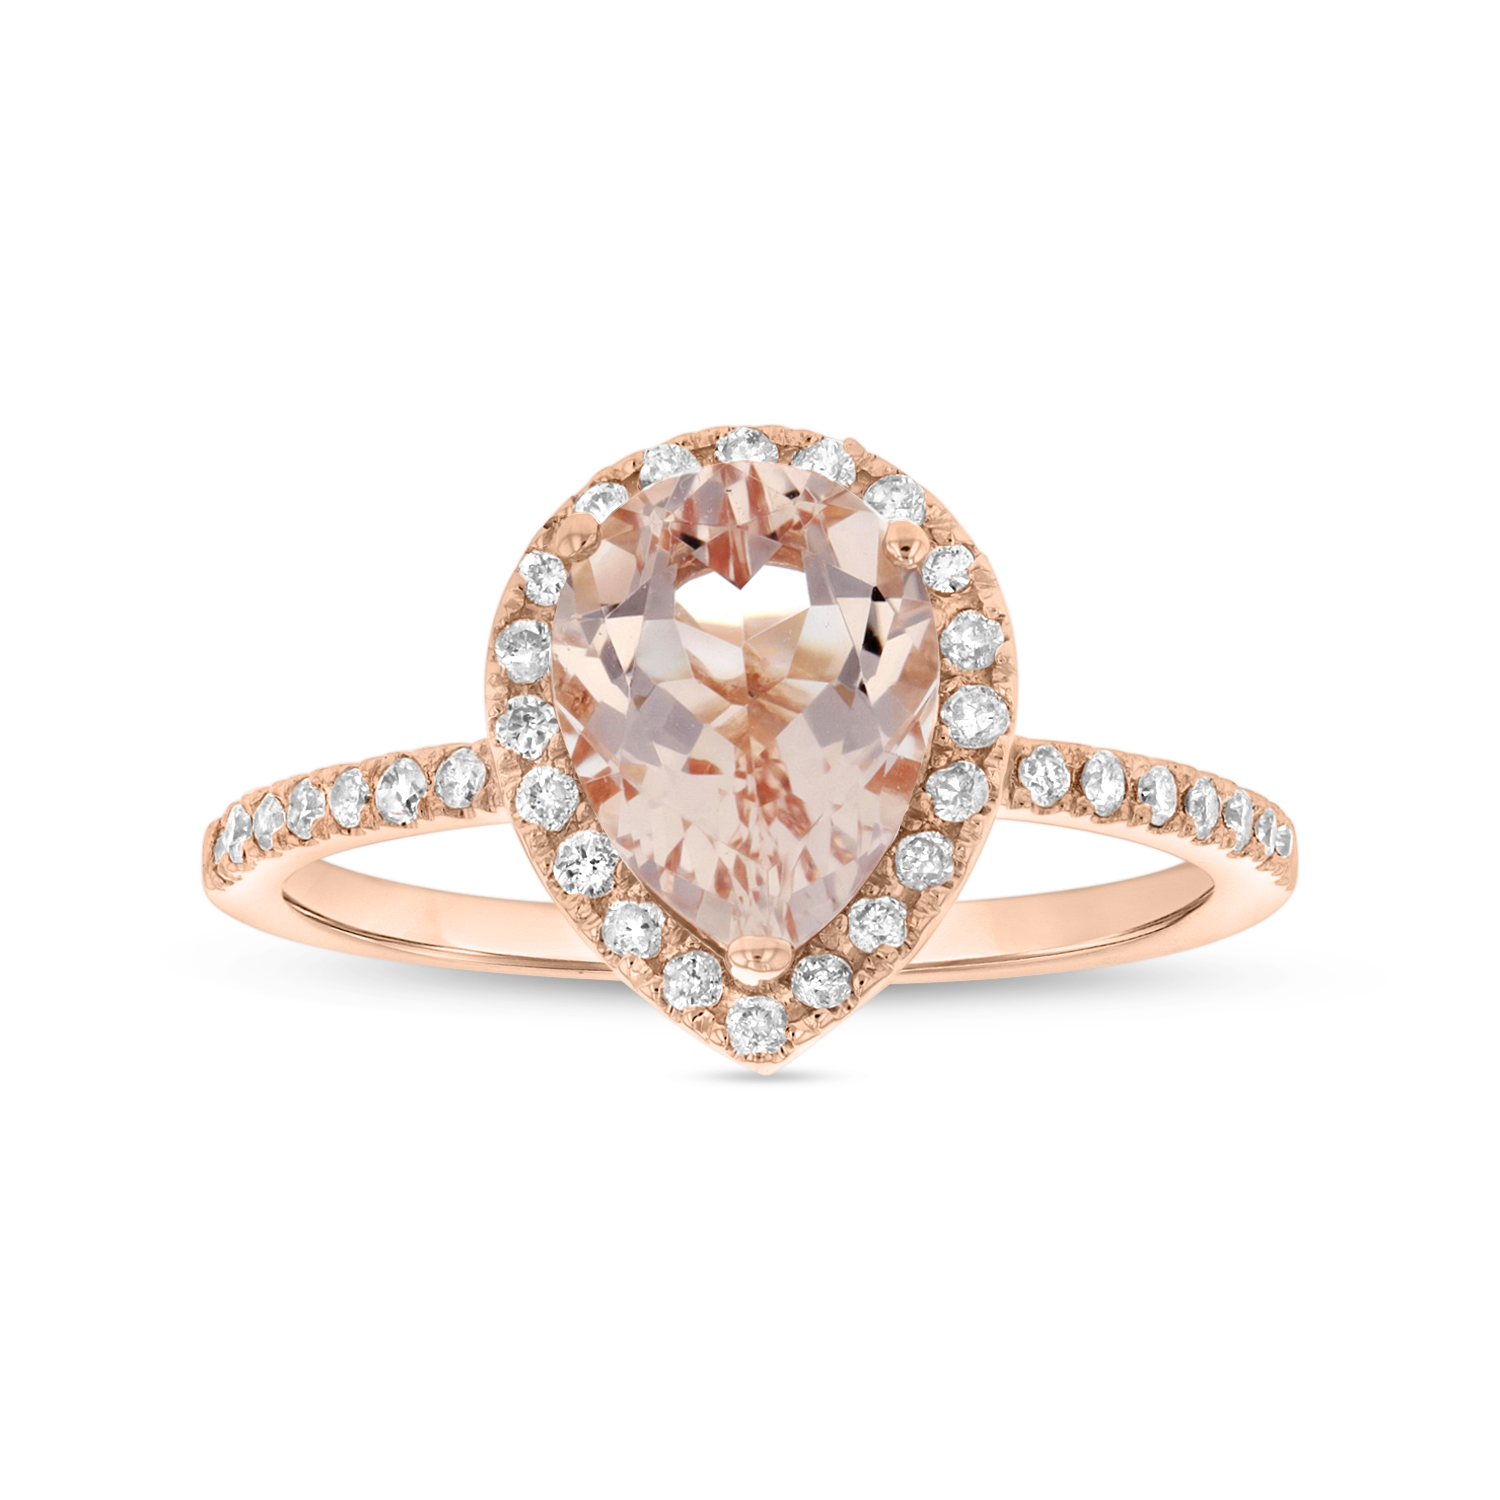 View 7X5 mm Pear Shaped Monganite and  Diamond Ring in 14k Rose Gold